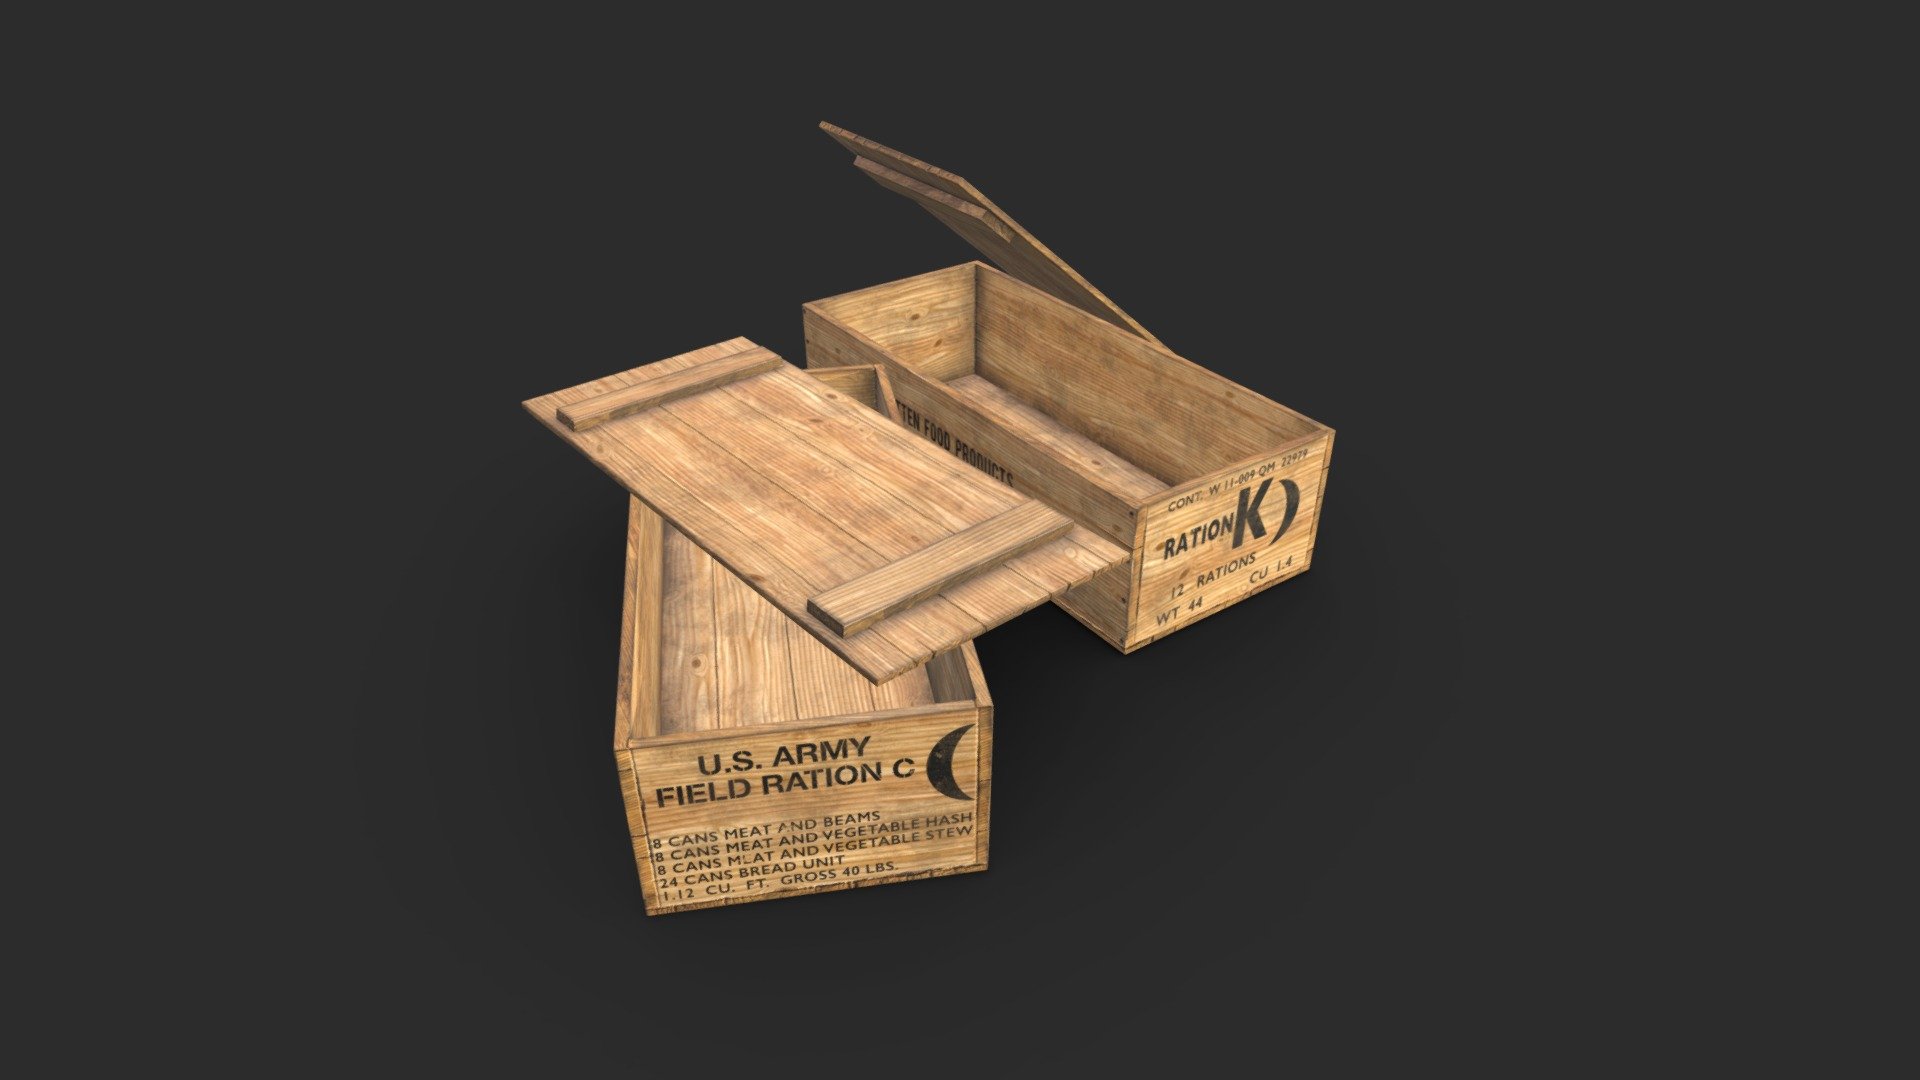 This is a model of a US army K-rations and C-rations wooden crate set used during the end of the Second World War for soldiers on the front. The model include 2 versions of the crate : C ration &amp; K ration. 
A total of 36 units were stored in the K-Ration crate and 48 cans were stored in each C-Ration crate. 

The models can be closed or opened, the top is separated of the box.

Originally created with Blender 2.78c

SPECIFICATIONS

Objects : 4 
Polygons : 332 
Subdivision ready : No 
Render engine : Cycles render

Each wooden crate 
Polygons : 166 
Vertices : 163

TEXTURES

Materials in scene : 2 
Texture size (2048x2048 px) 
Textures (Diffuse, Metallic, Roughness, Normal, Heigh and AO) are included 
Textures format : PNG

GENERAL

Real scale : Yes - Wooden Crate K & C Rations WWII - Buy Royalty Free 3D model by KangaroOz 3D (@KangaroOz-3D) 3d model